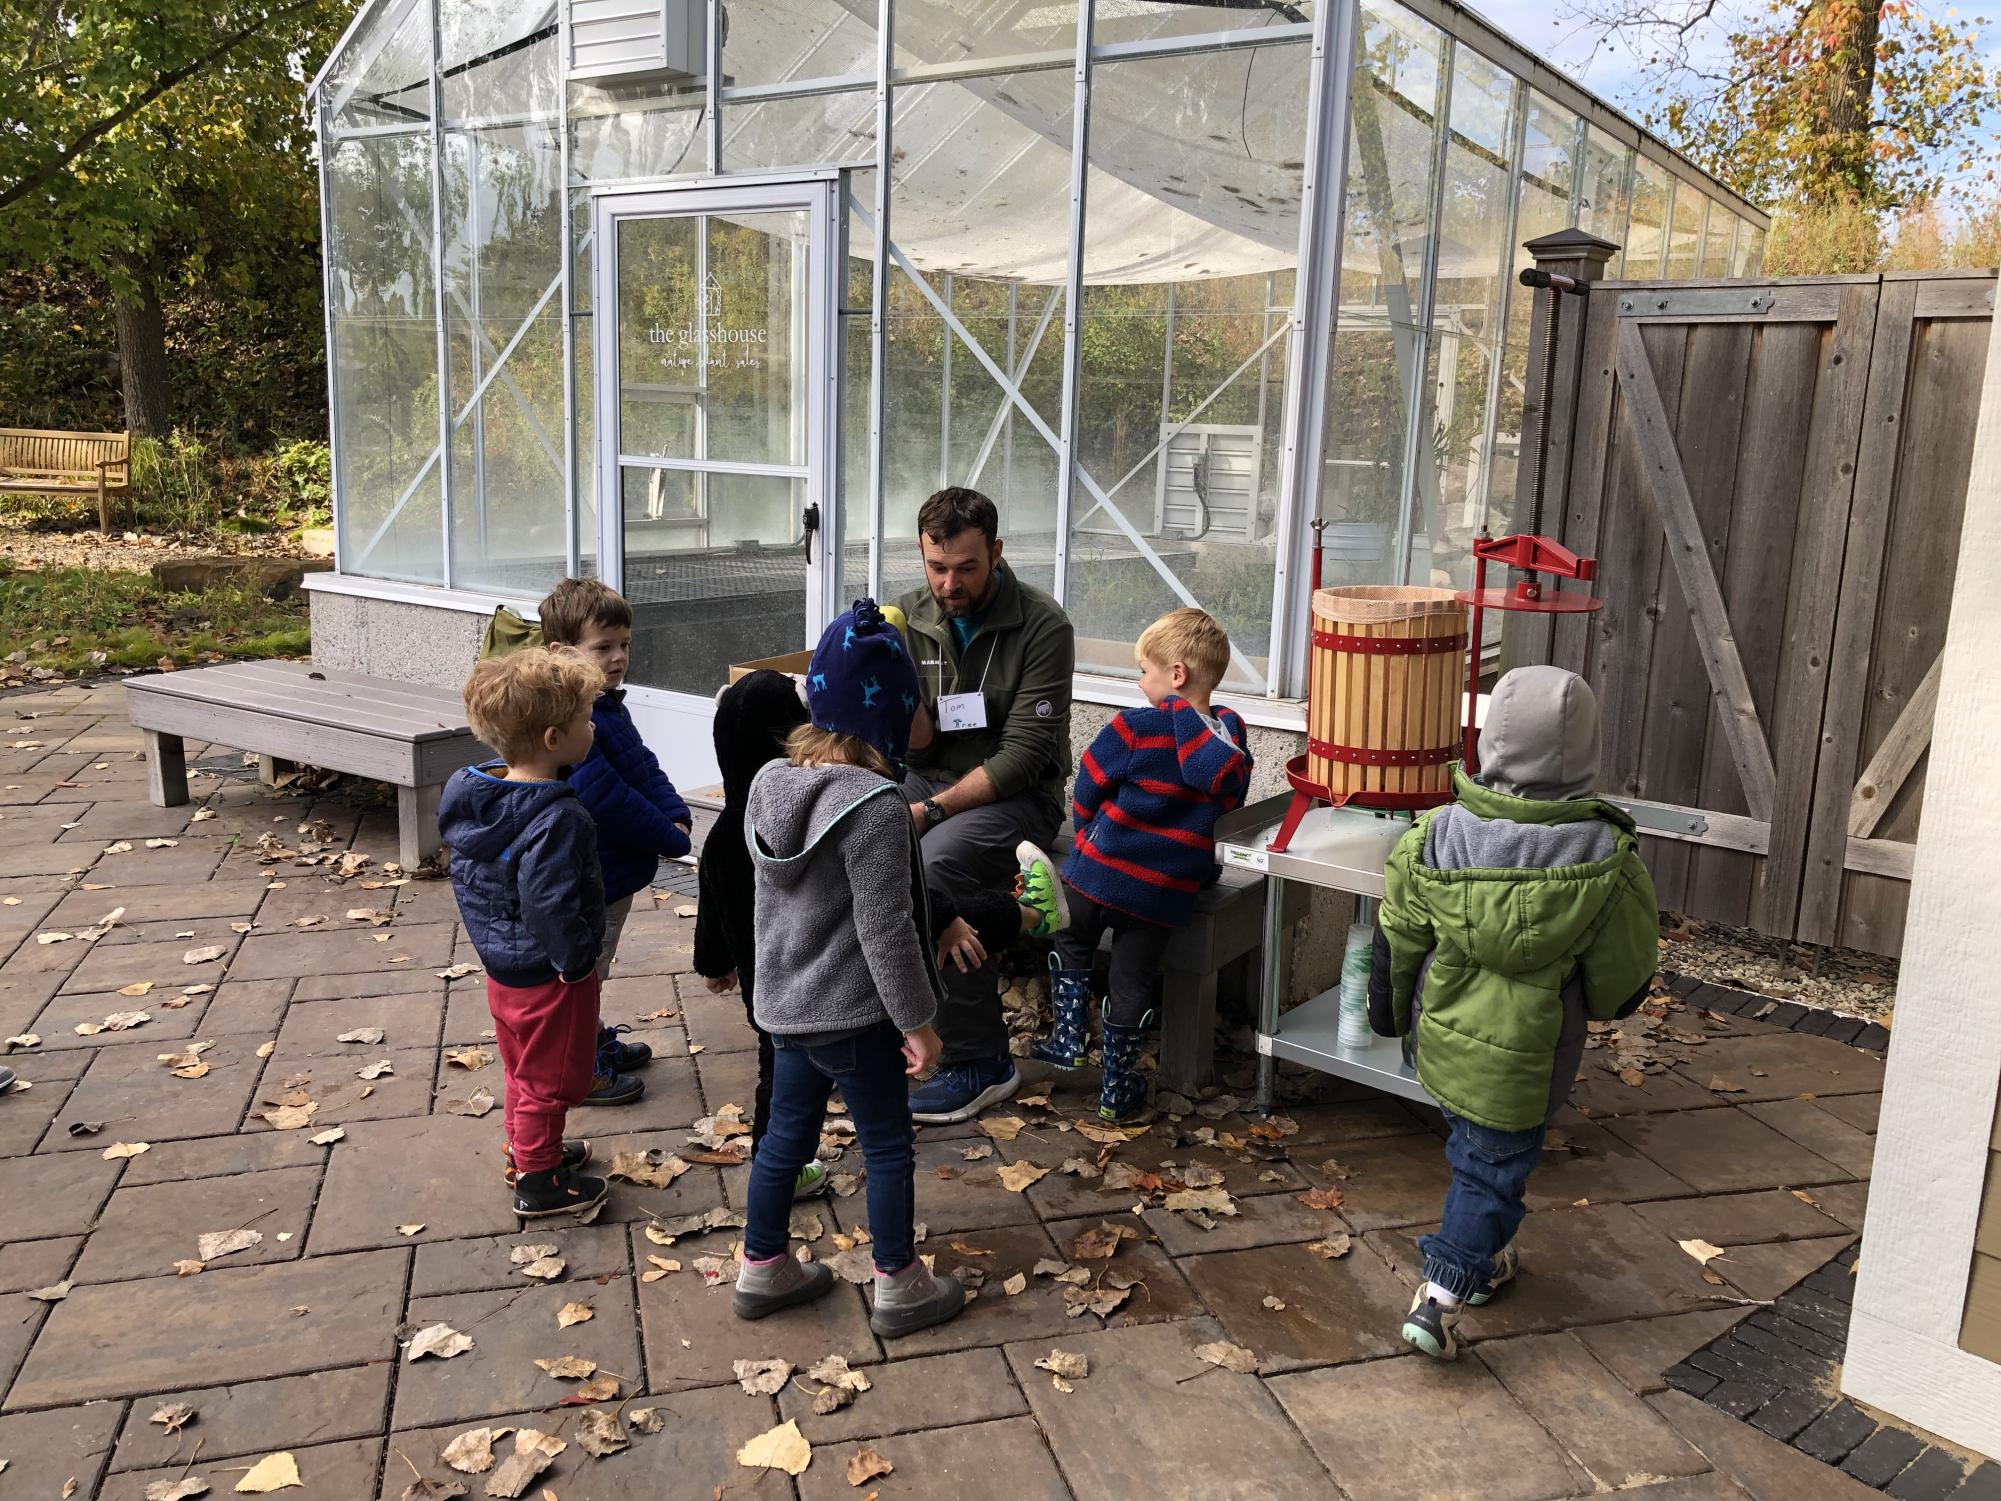 The Saplings meet Thursday mornings in the Bunker Interpretive Center, where they can grow in
curiosity about the outdoors.